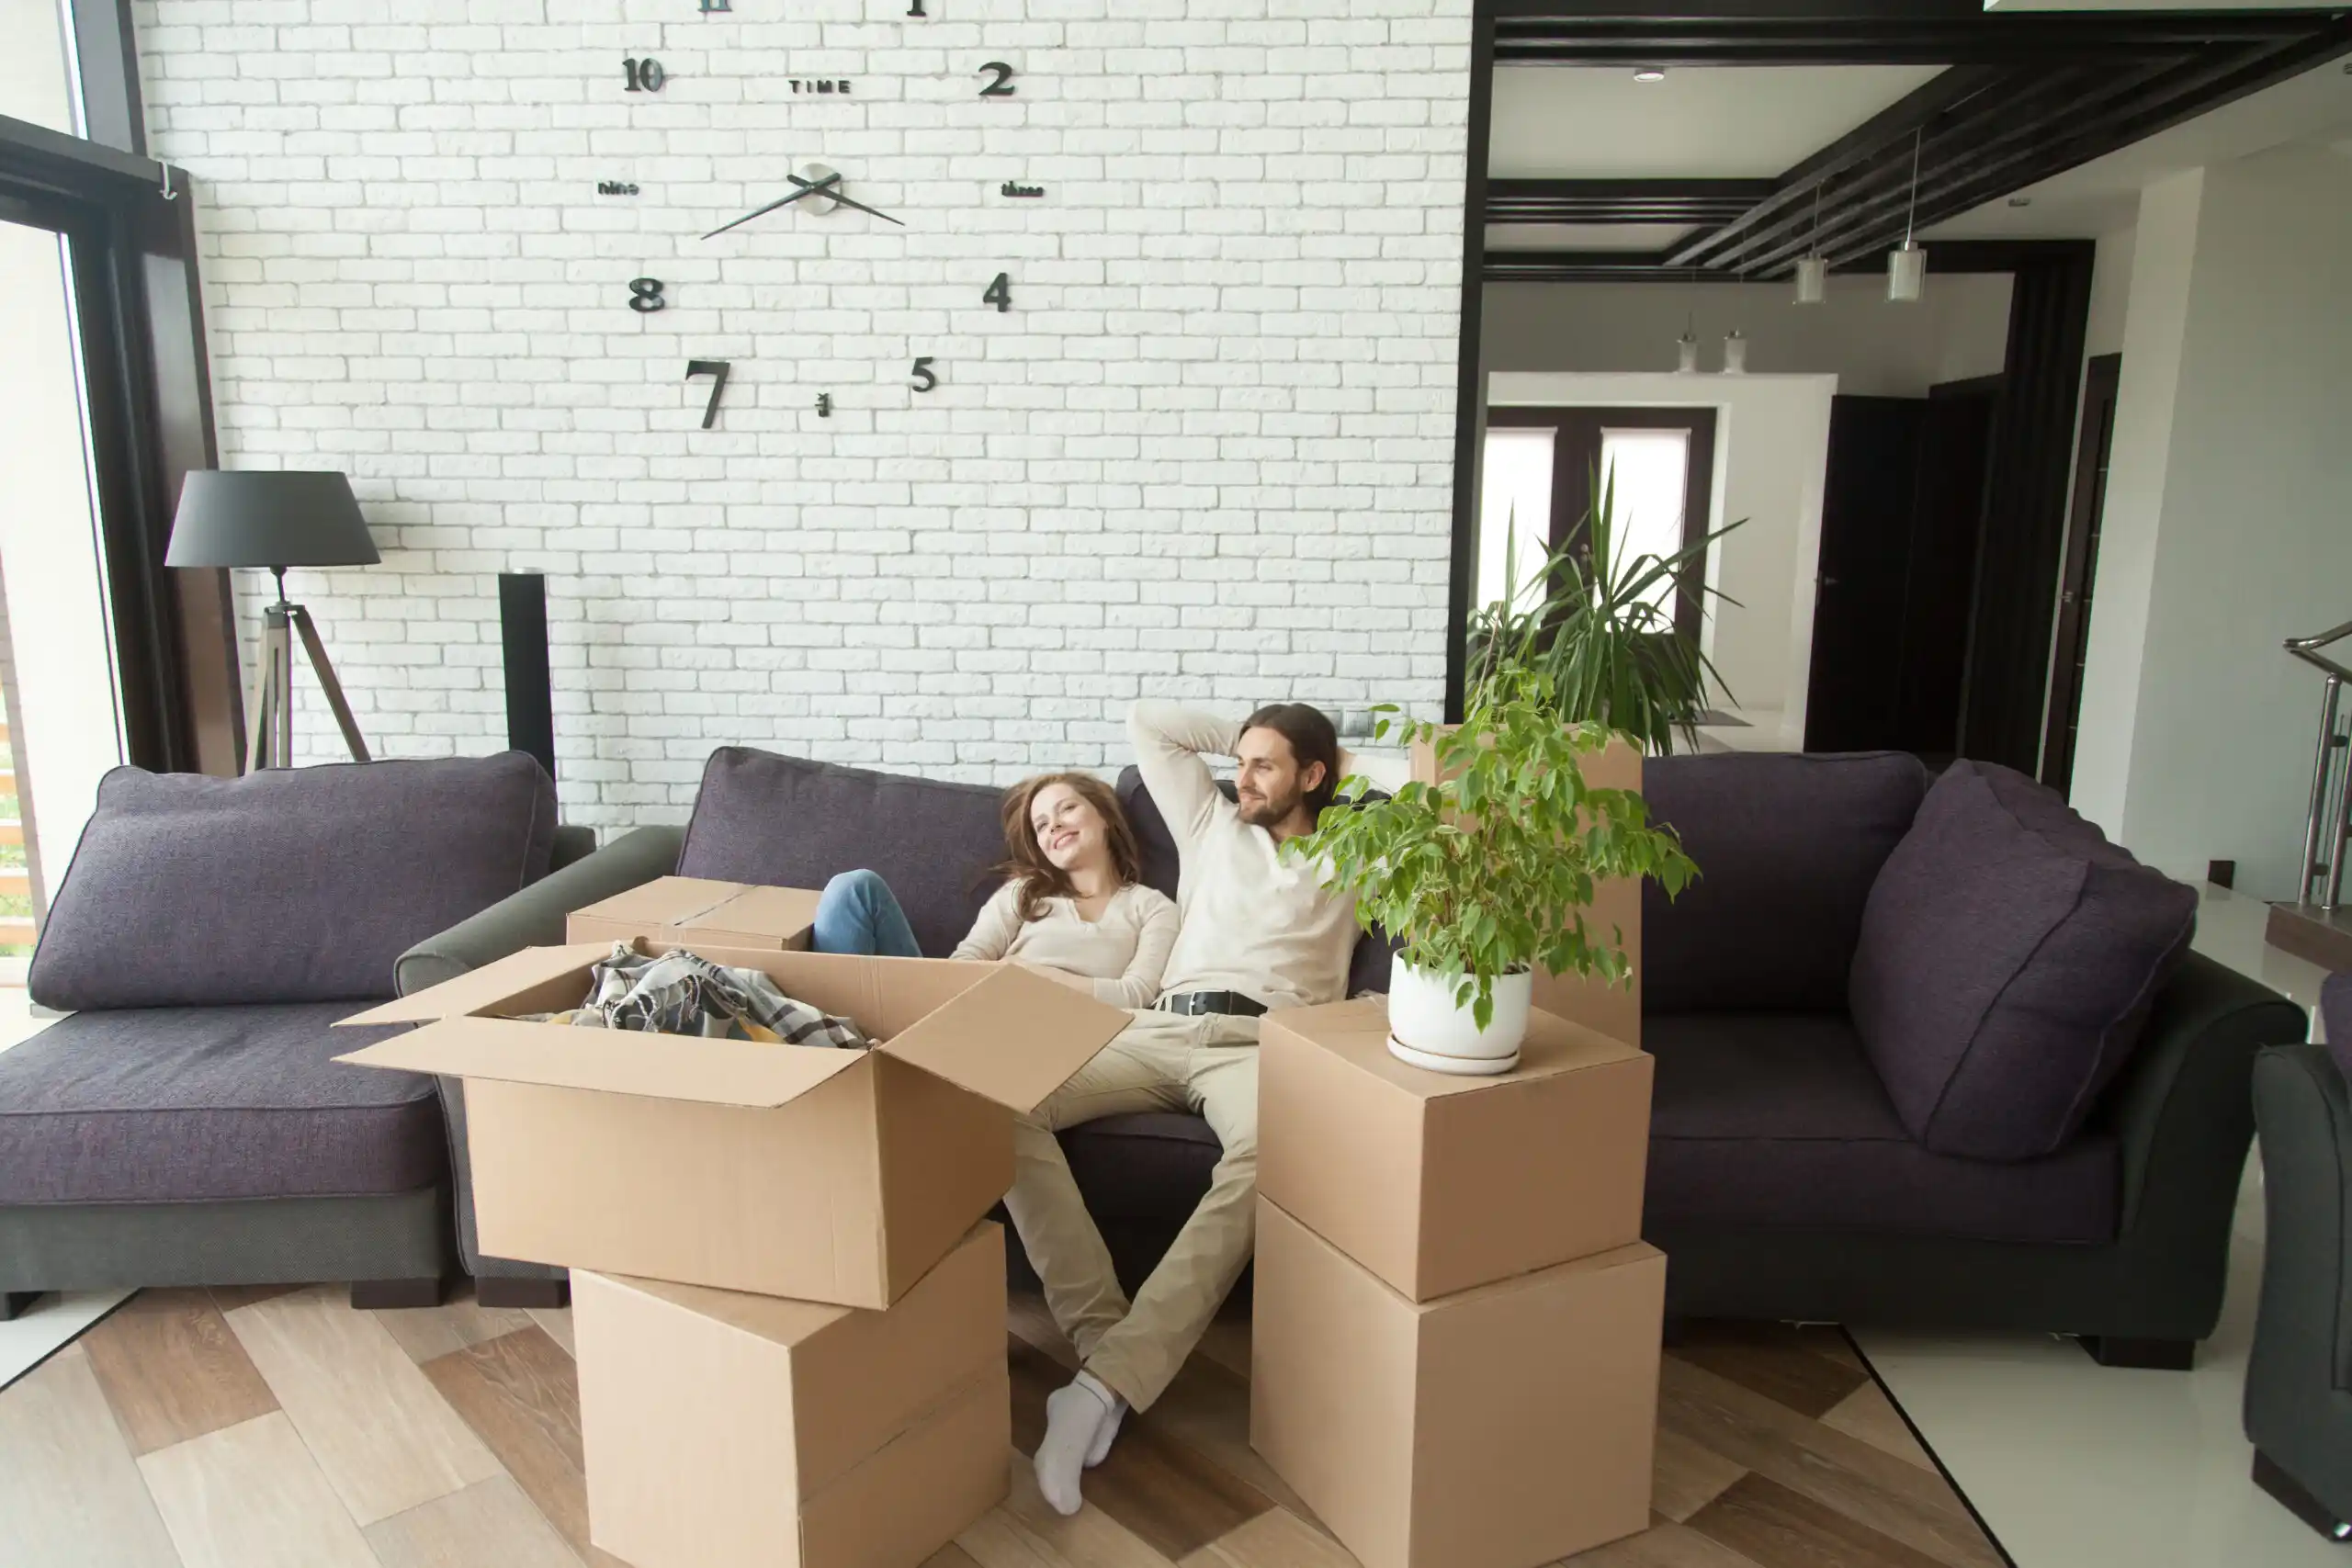 Couple moving into their first apartment